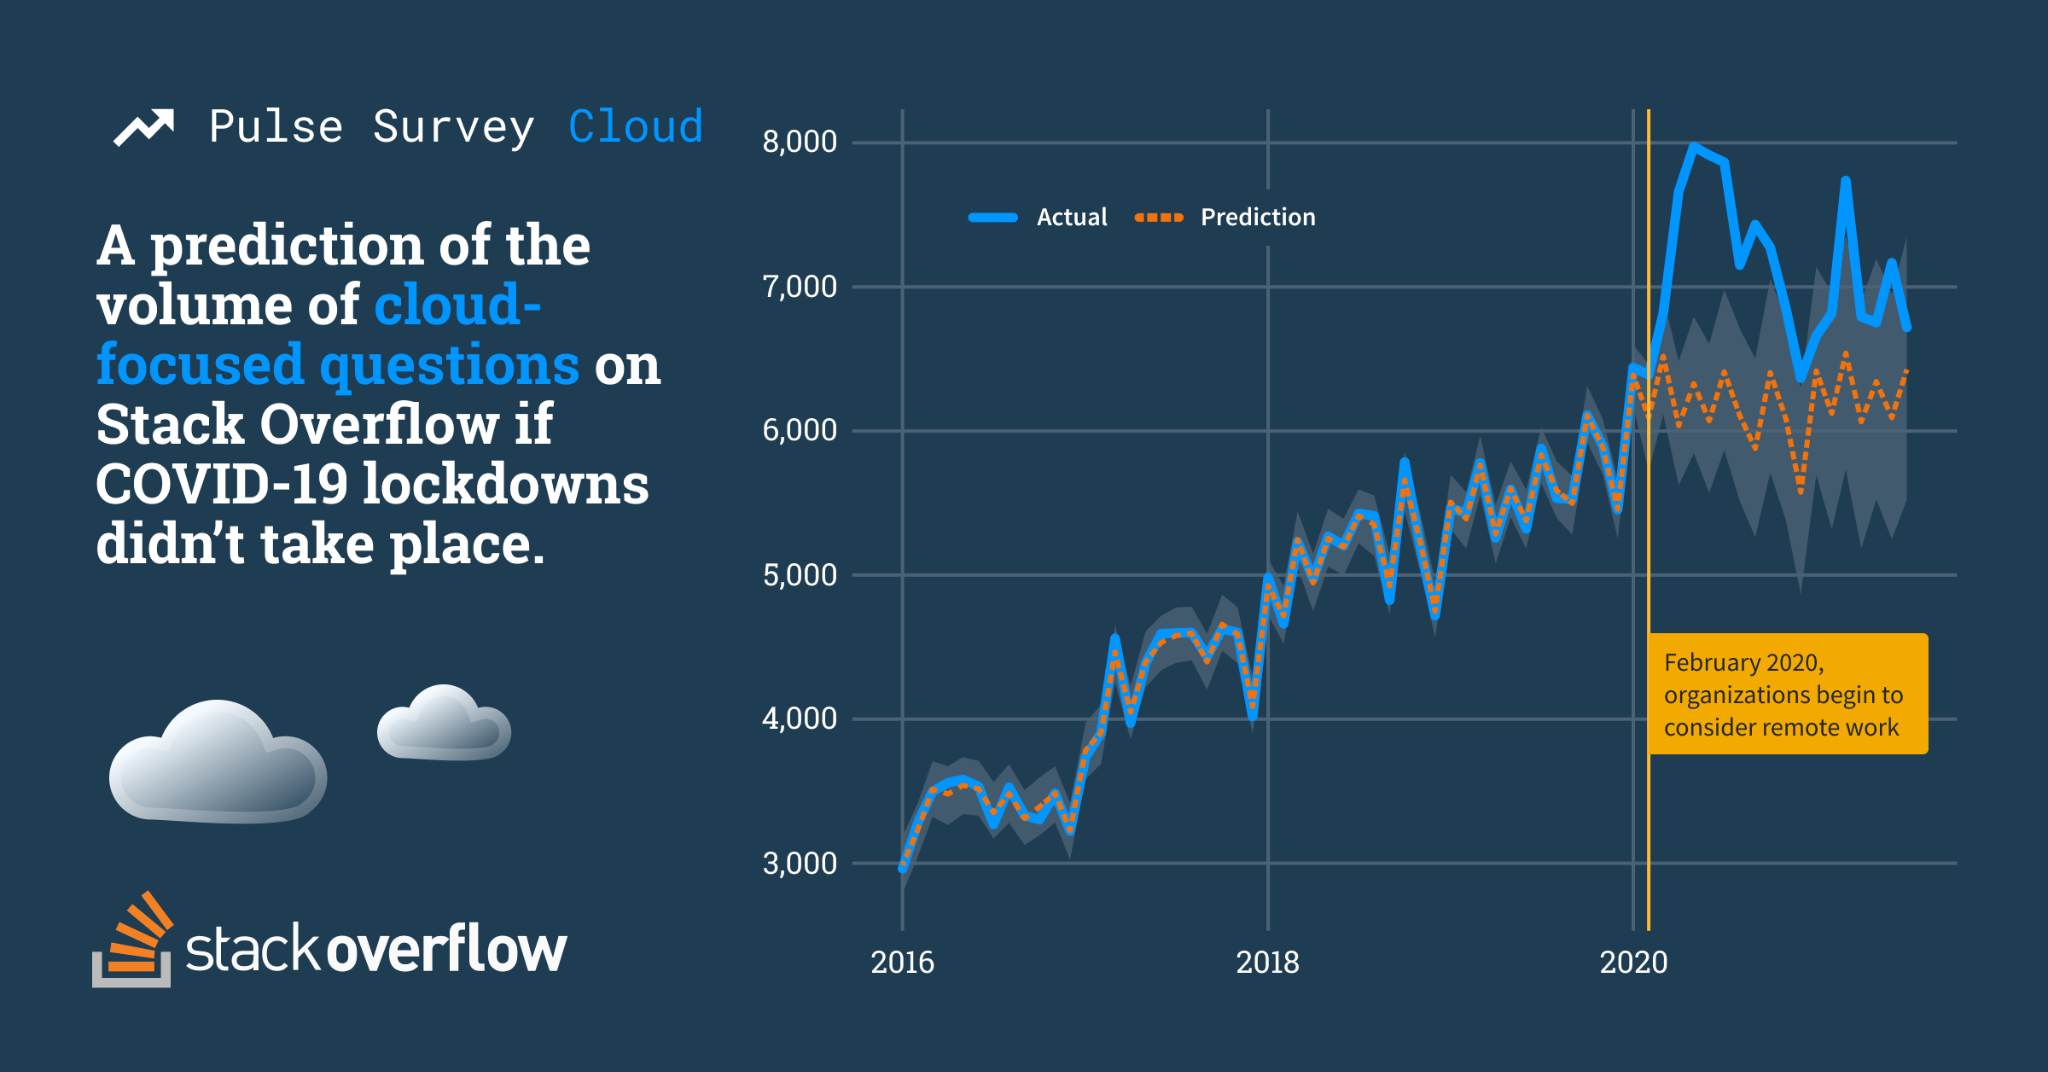 Line chart showing growth of cloud-related questions asked on Stack Overflow from 2016 to September 2021 with a separate line prediction questions asked after February 2020 if COVID-19 lockdowns didn't occur. After February 2020, we see the actual values have a dramatic spike reach close to 8,000, while the predicted value remains steady at around 6,000.